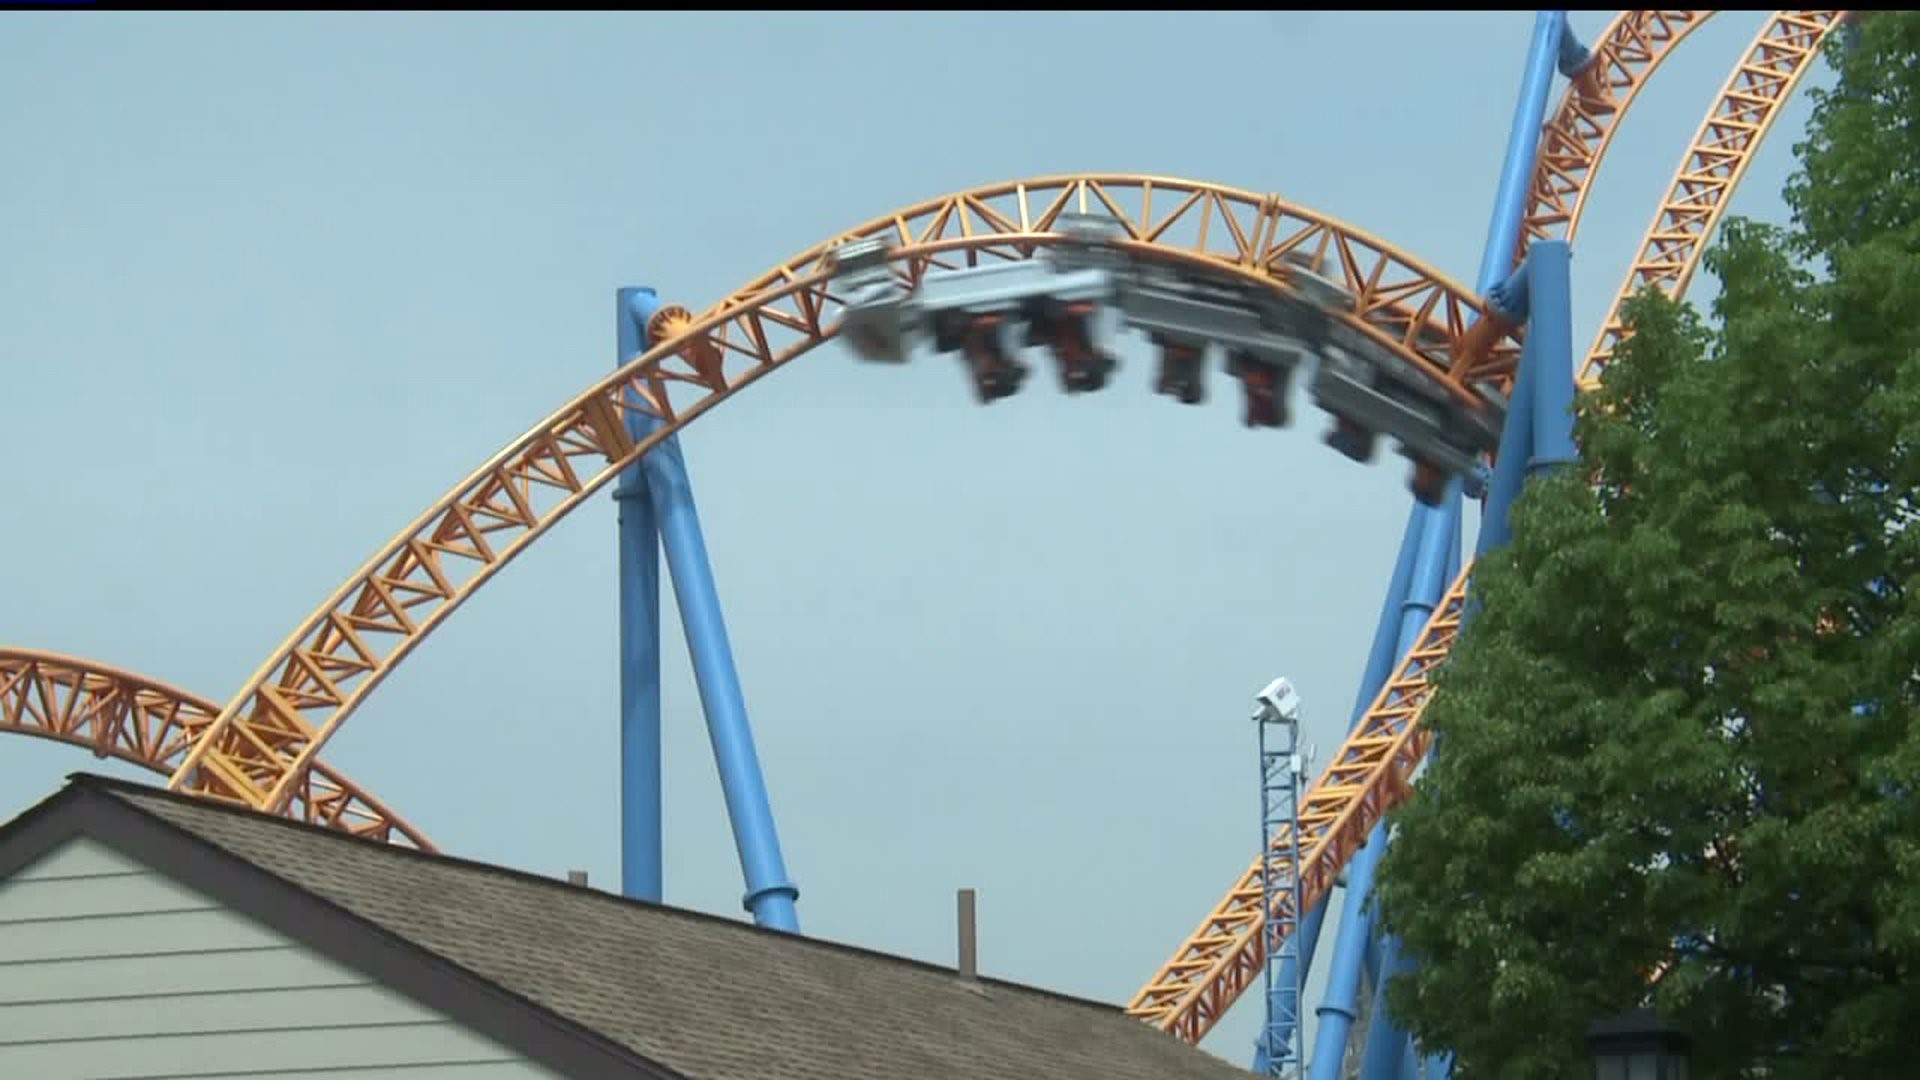 Hersheypark gets ready to open the park for the Summer season!